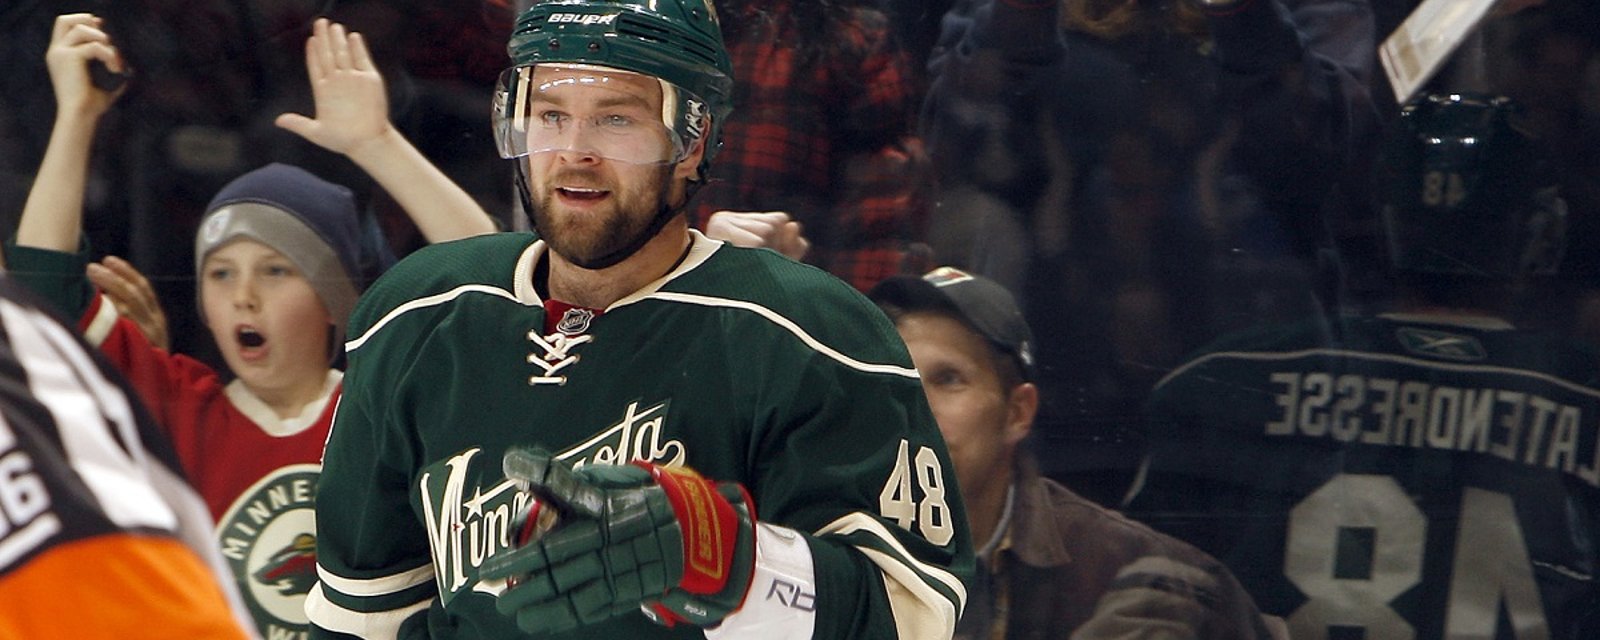 Former Wild forward becomes youngest player to join concussion lawsuit against the NHL.